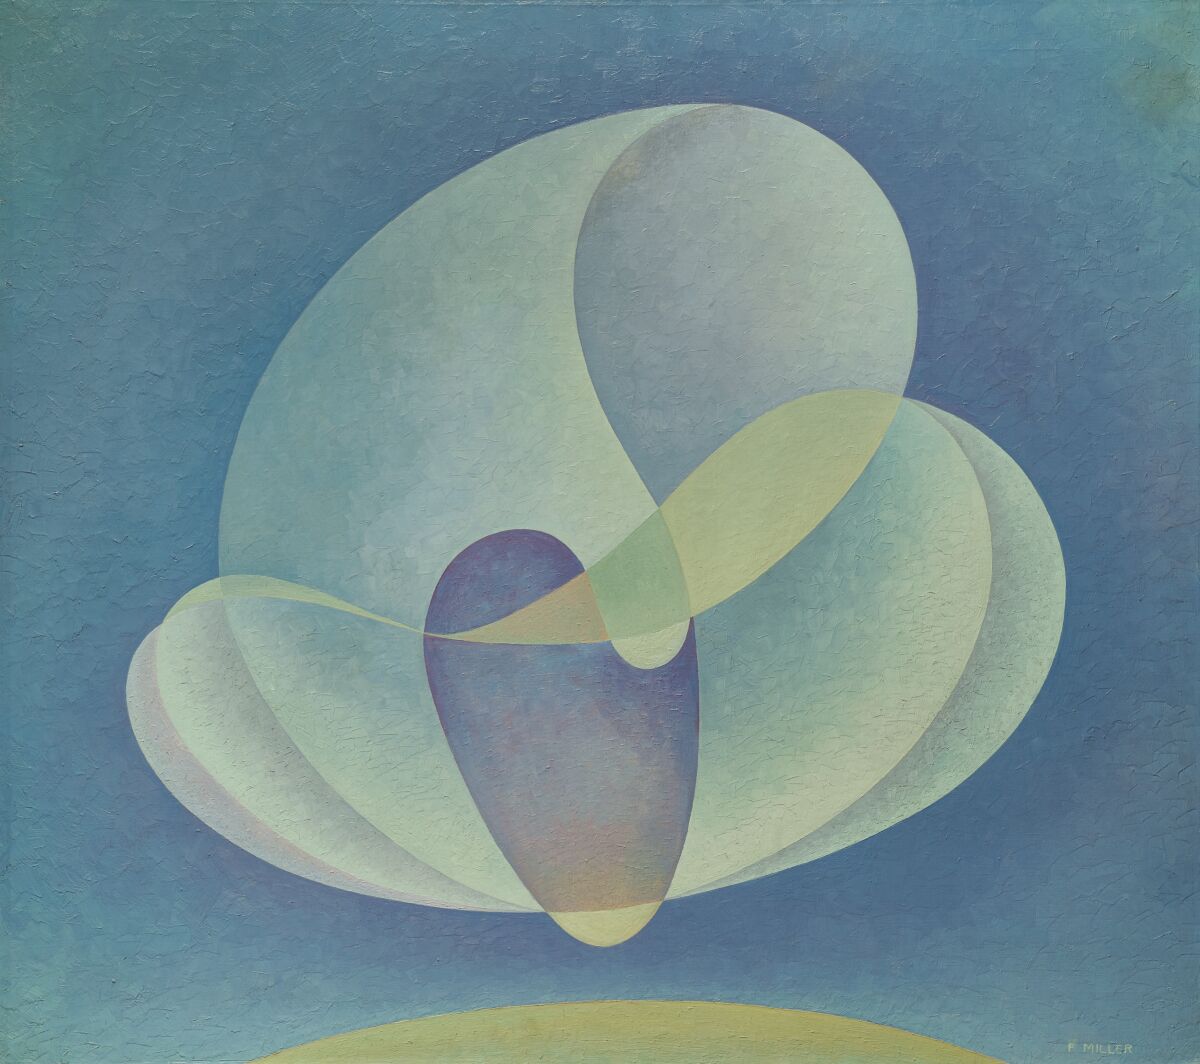 Florence Miller Pierce, Blue Forms, 1942, Collection of Georgia and Michael de Havenon, New York.